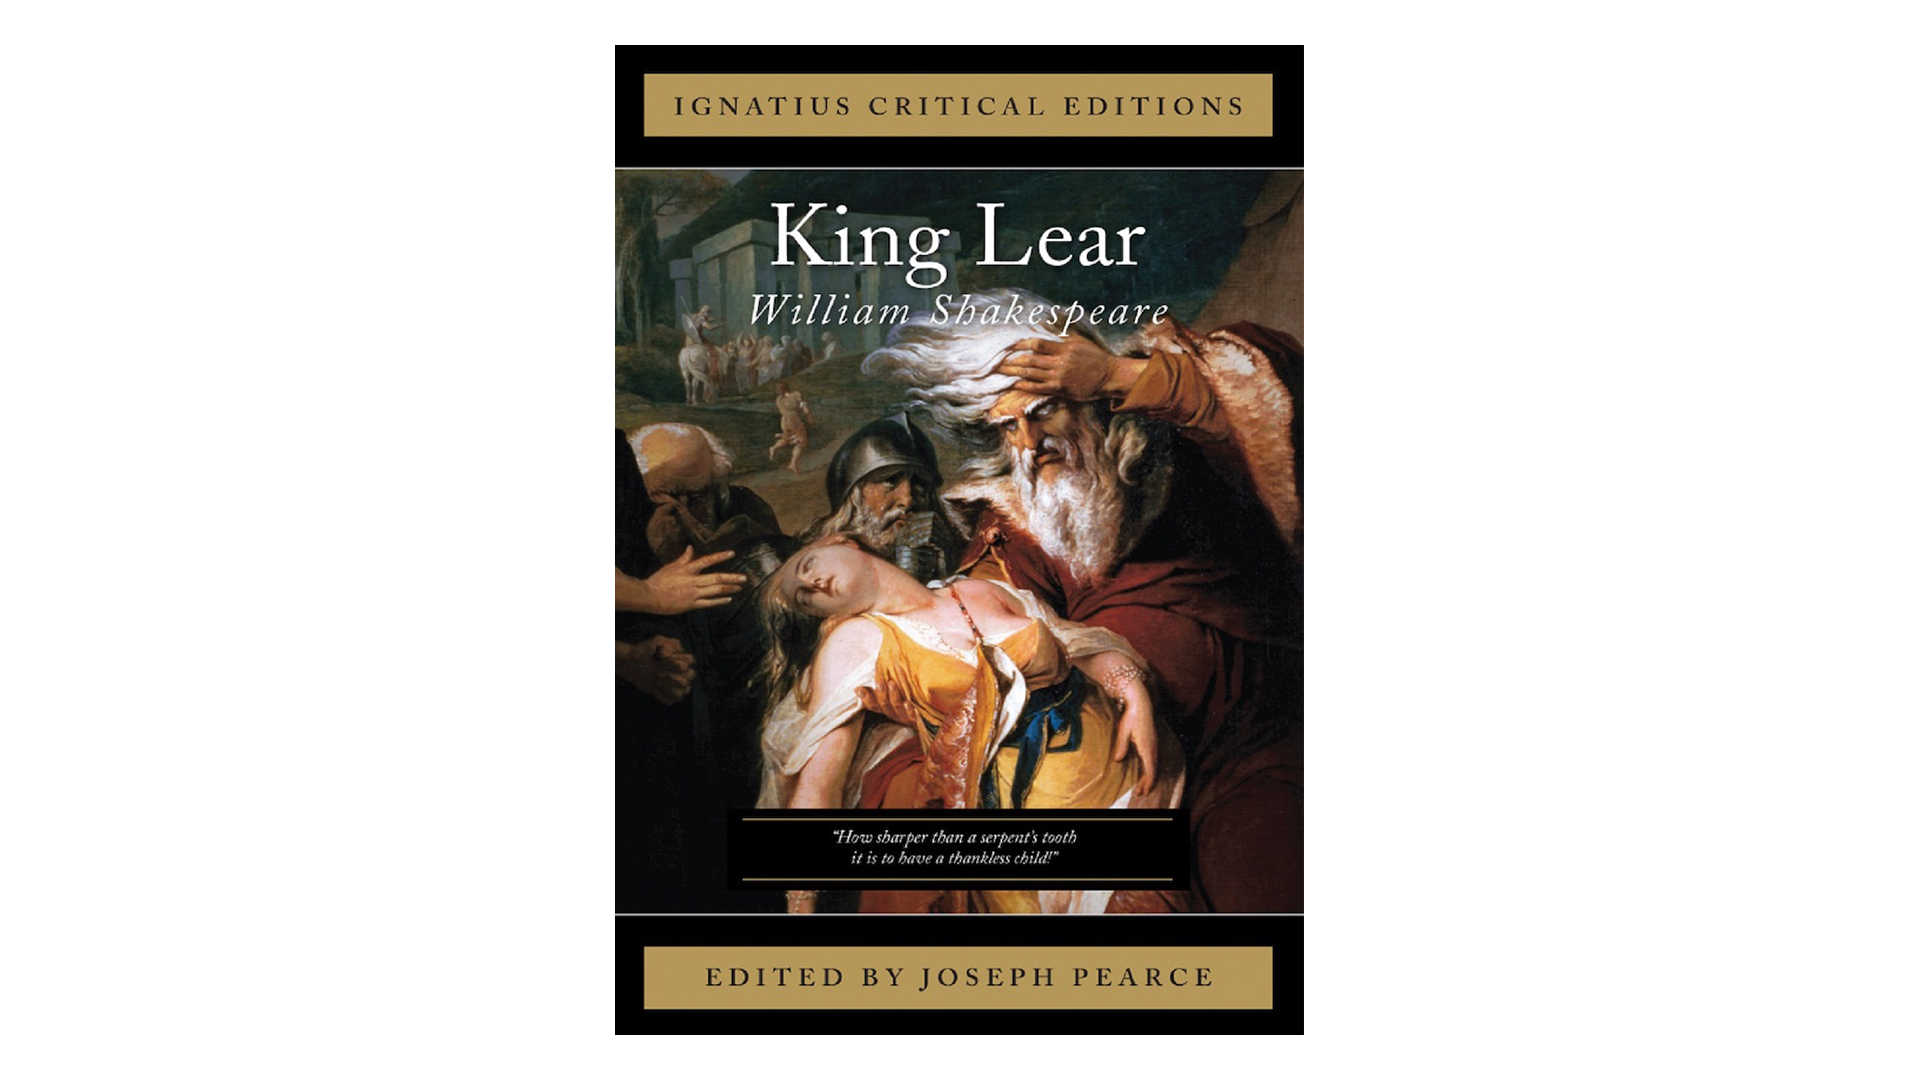 story of king lear by william shakespeare